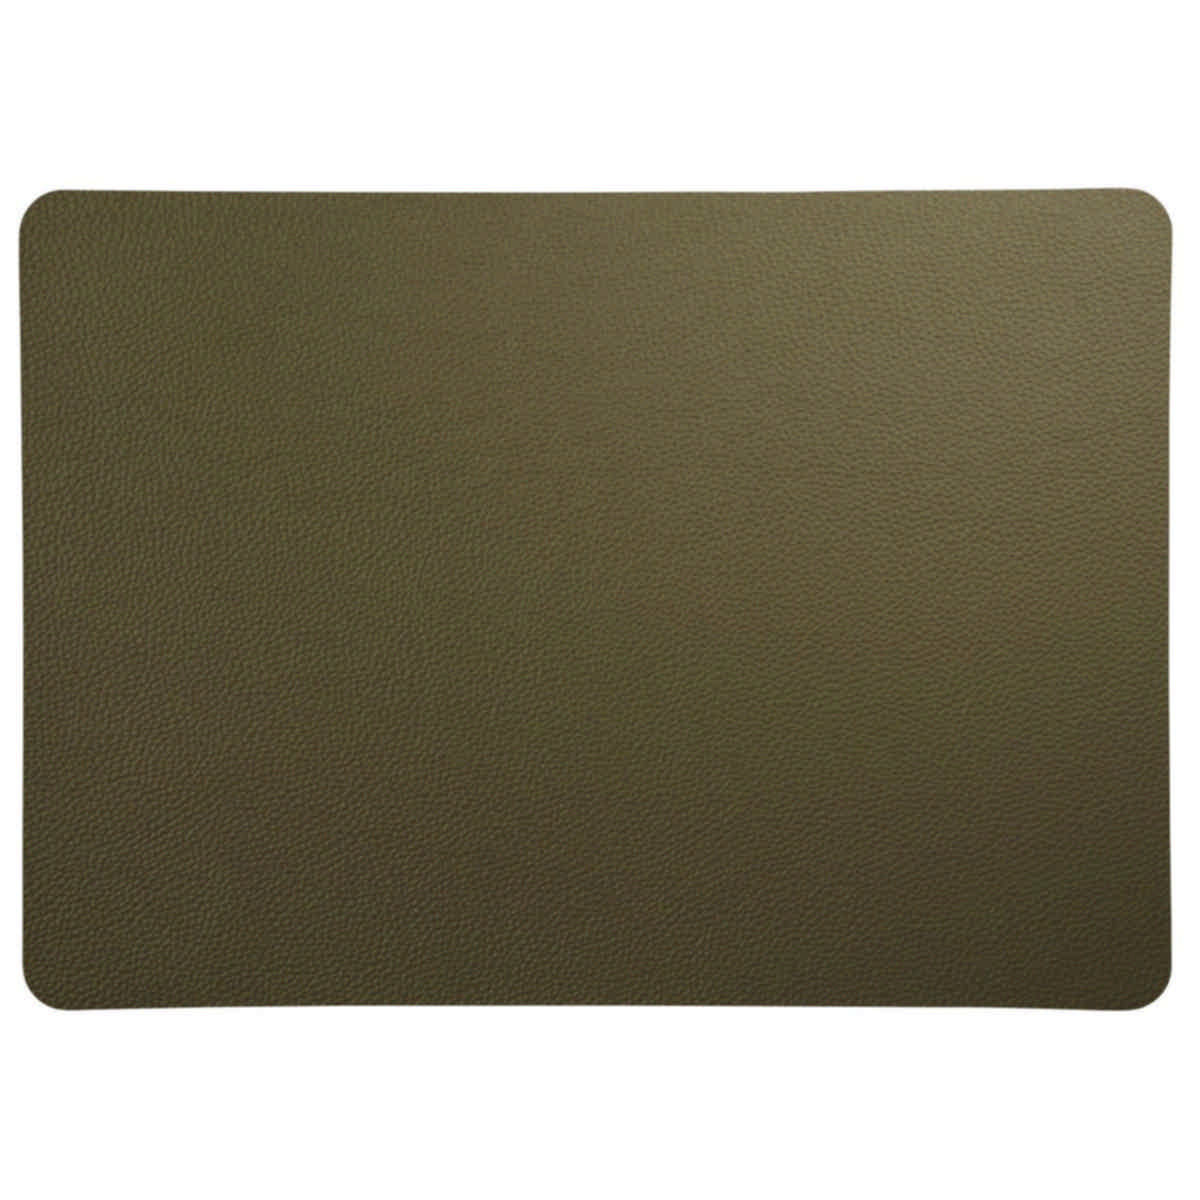 163673808 - Asa-Selection Placemat rough olive leather optic, 46*33 cm (8803420)